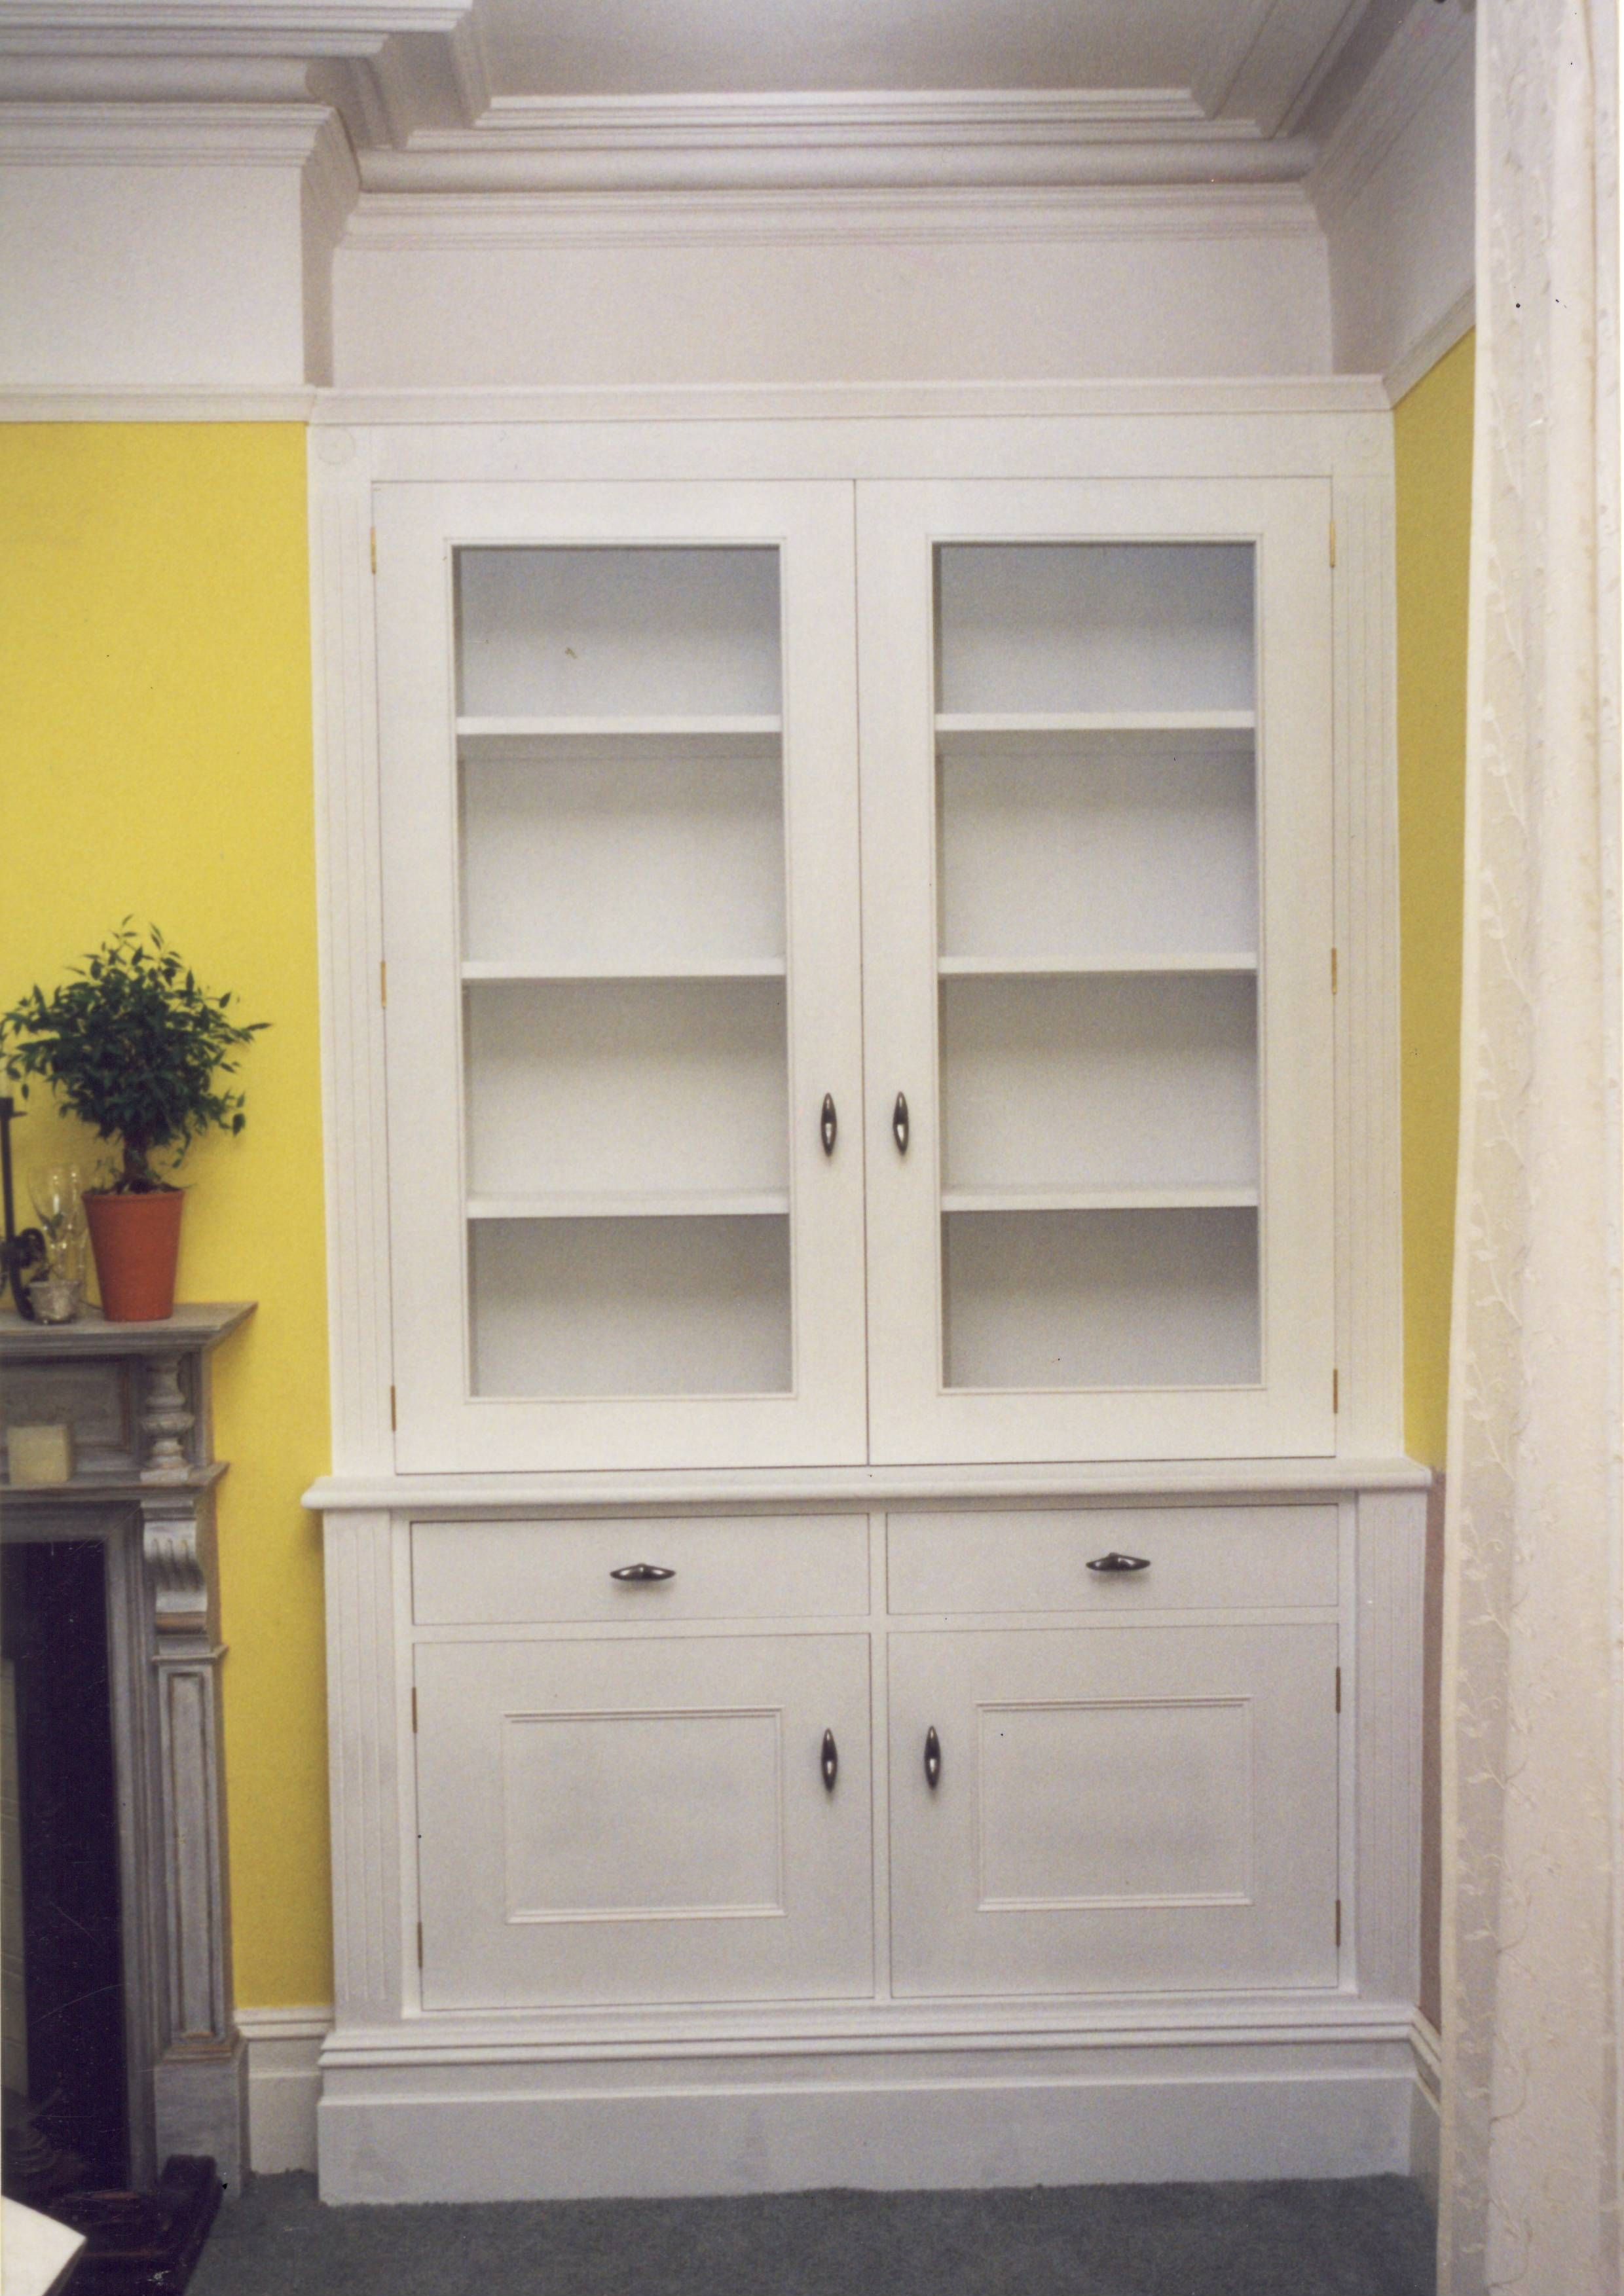 Handmade Built In Furniture Broughton Joinery Fitted Furniture Pertaining To Handmade Cupboards (View 6 of 15)